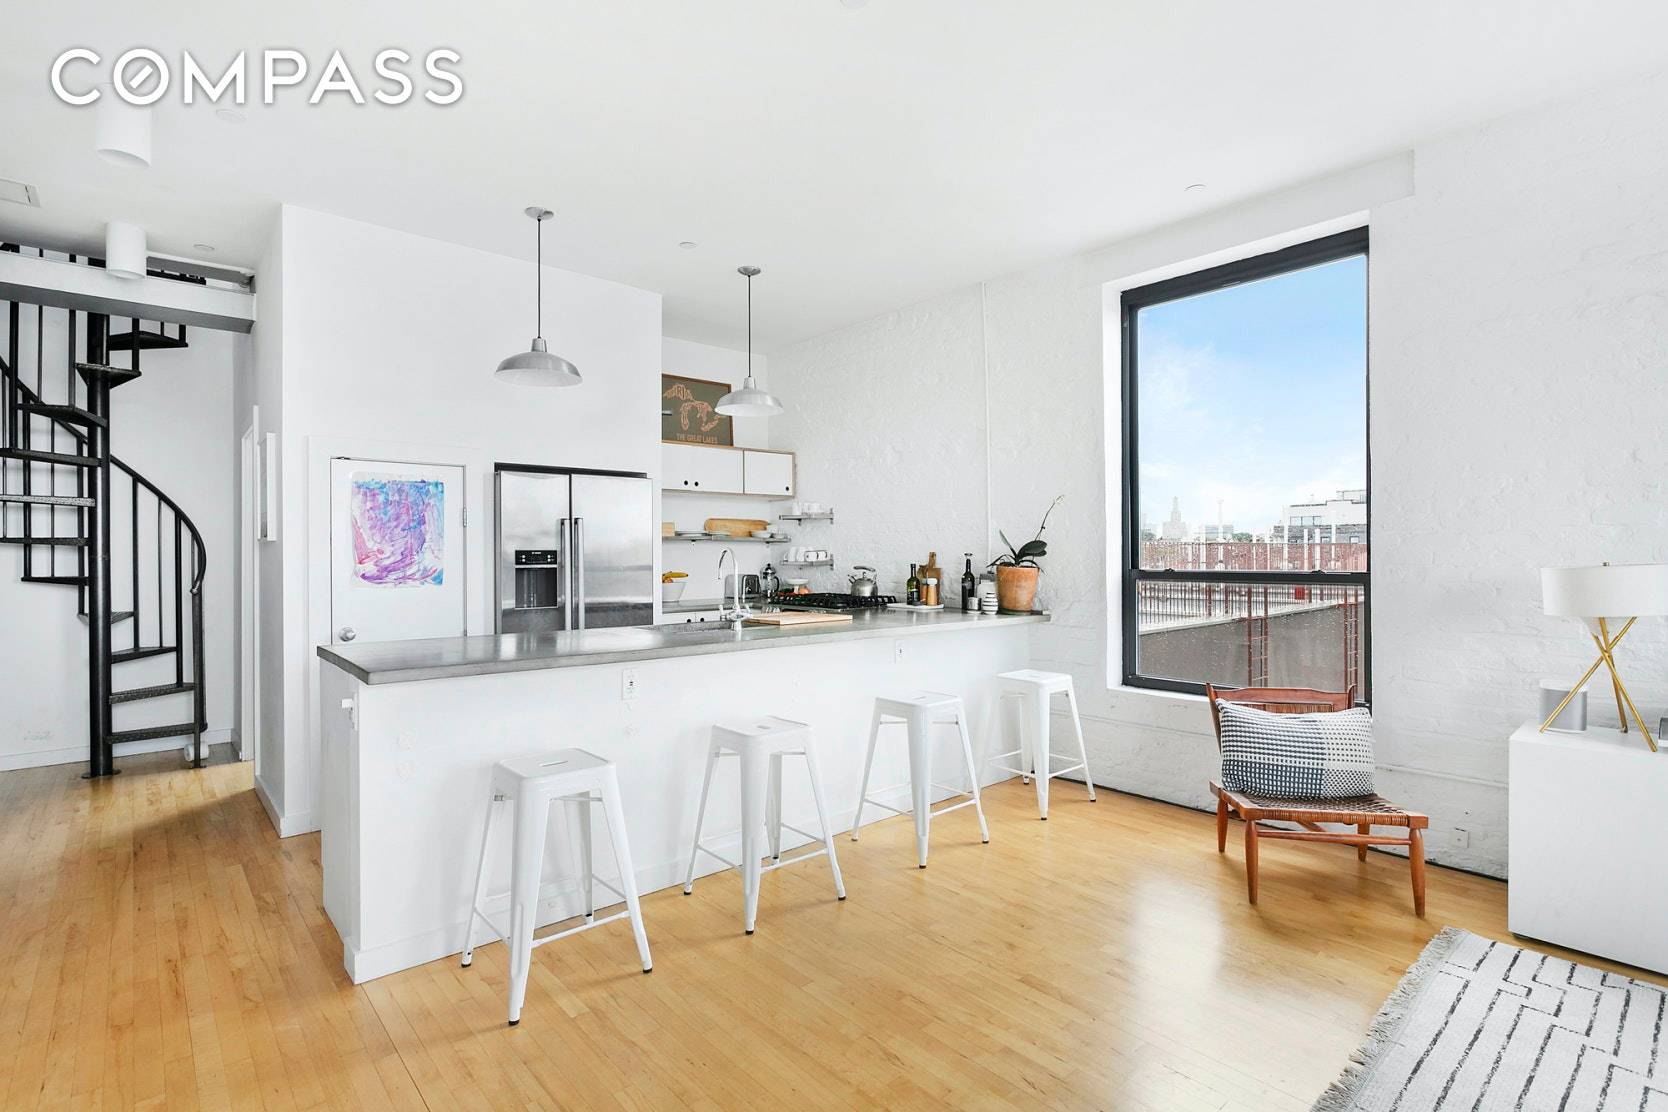 Beautiful and stunning split two bedroom condo penthouse apartment with LARGE, PRIVATE ROOFTOP TERRACE offering views of New York Harbor, Statue of Liberty and the Brooklyn and New York City ...